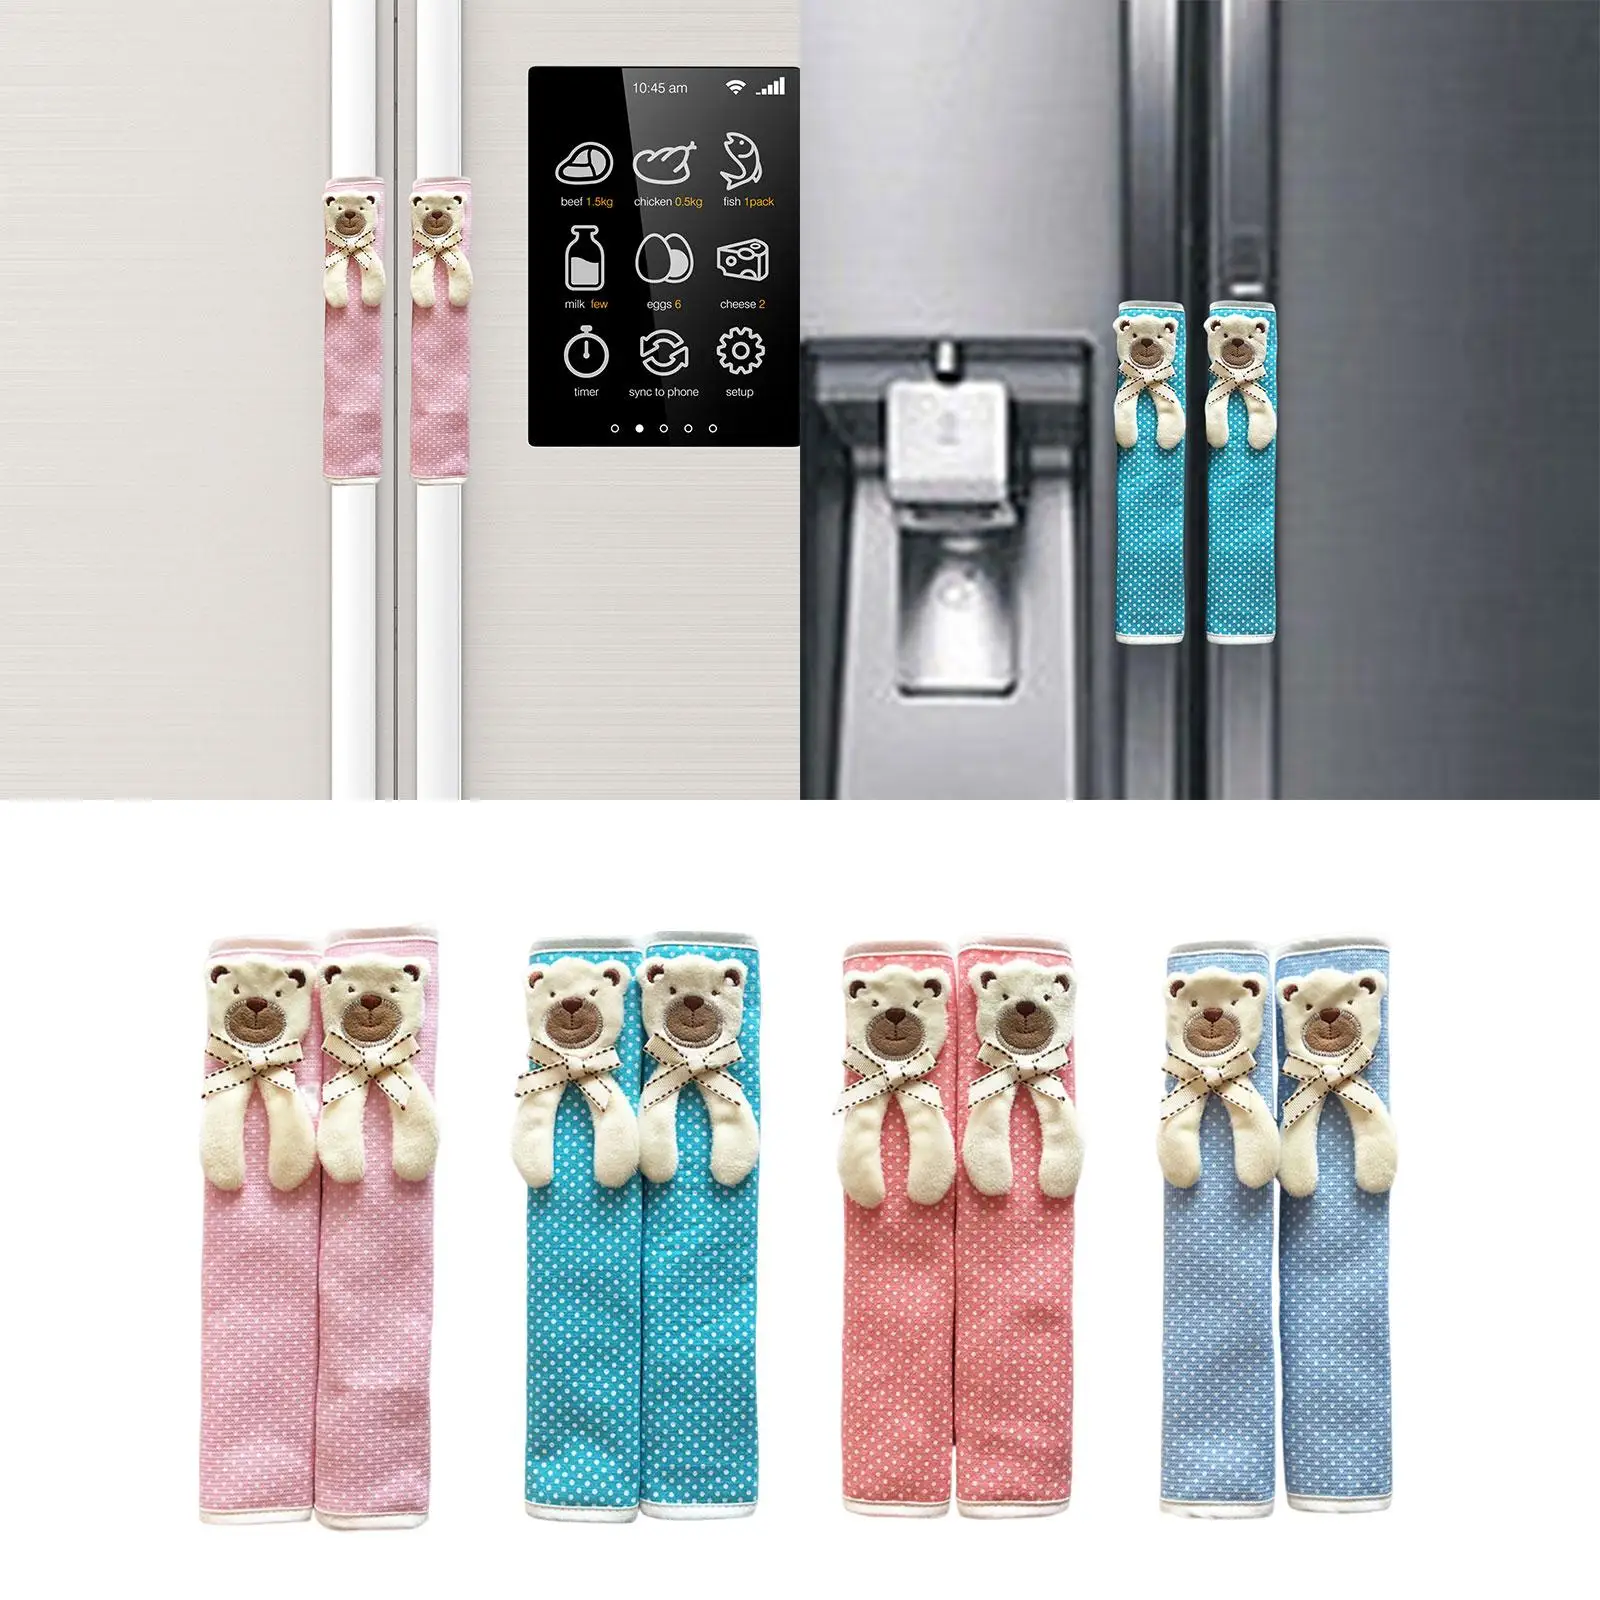 2Pcs Refrigerator Door Handle Covers Dust Covers Electrical Kitchen Appliances Gloves for Microwave Oven Freezer Fridge Decor